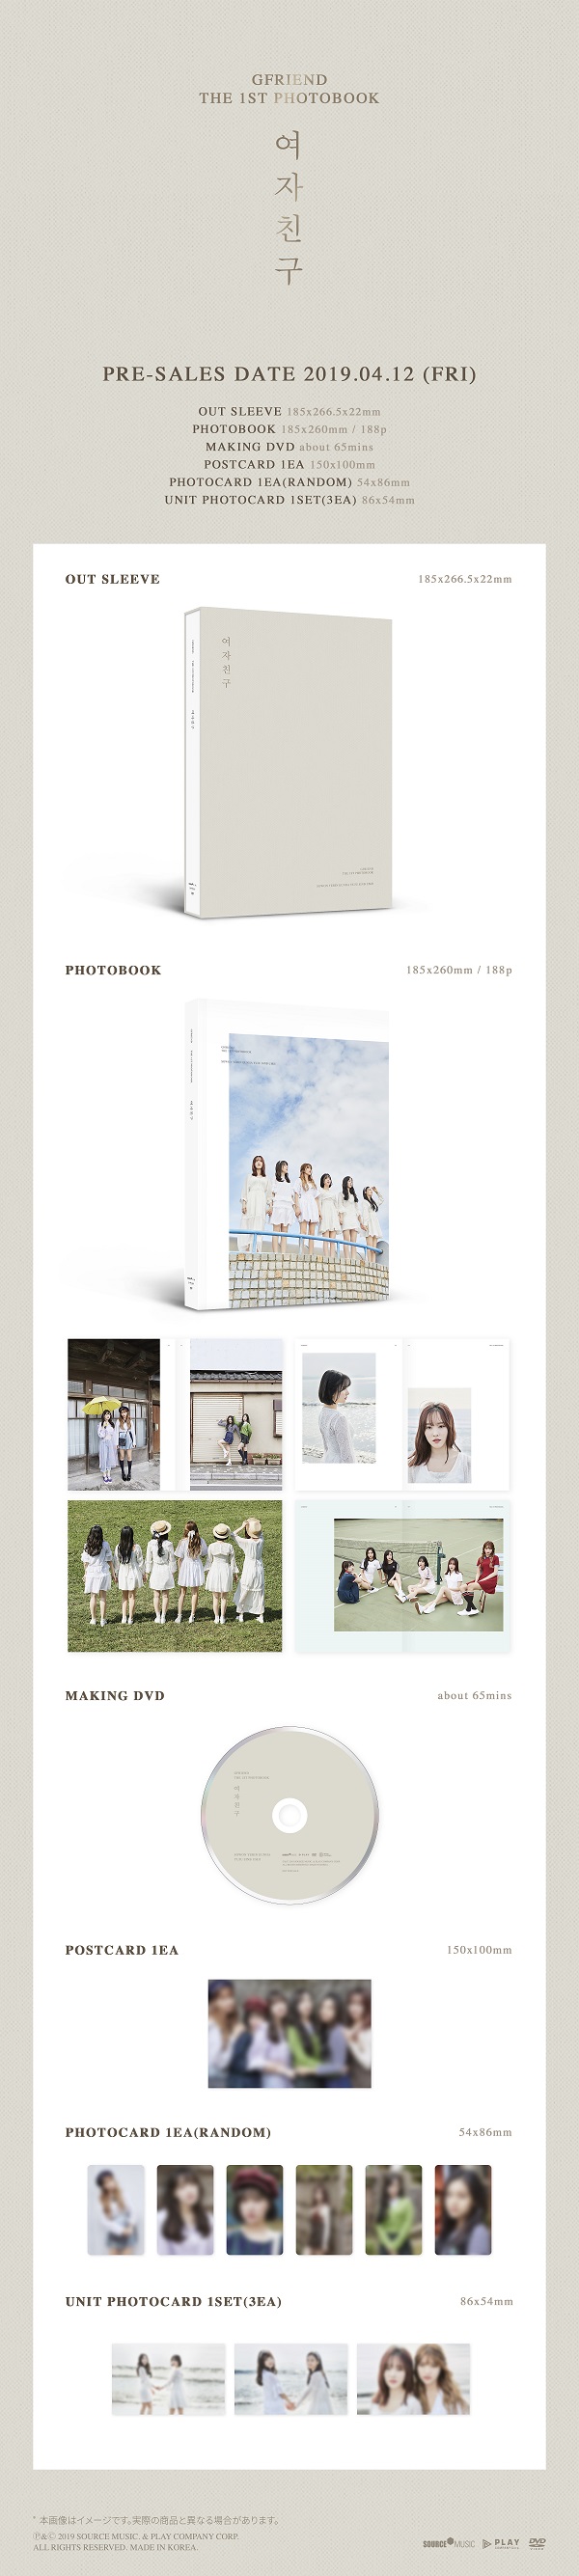 GFRIEND、初のフォトブック4月25日発売 - TOWER RECORDS ONLINE